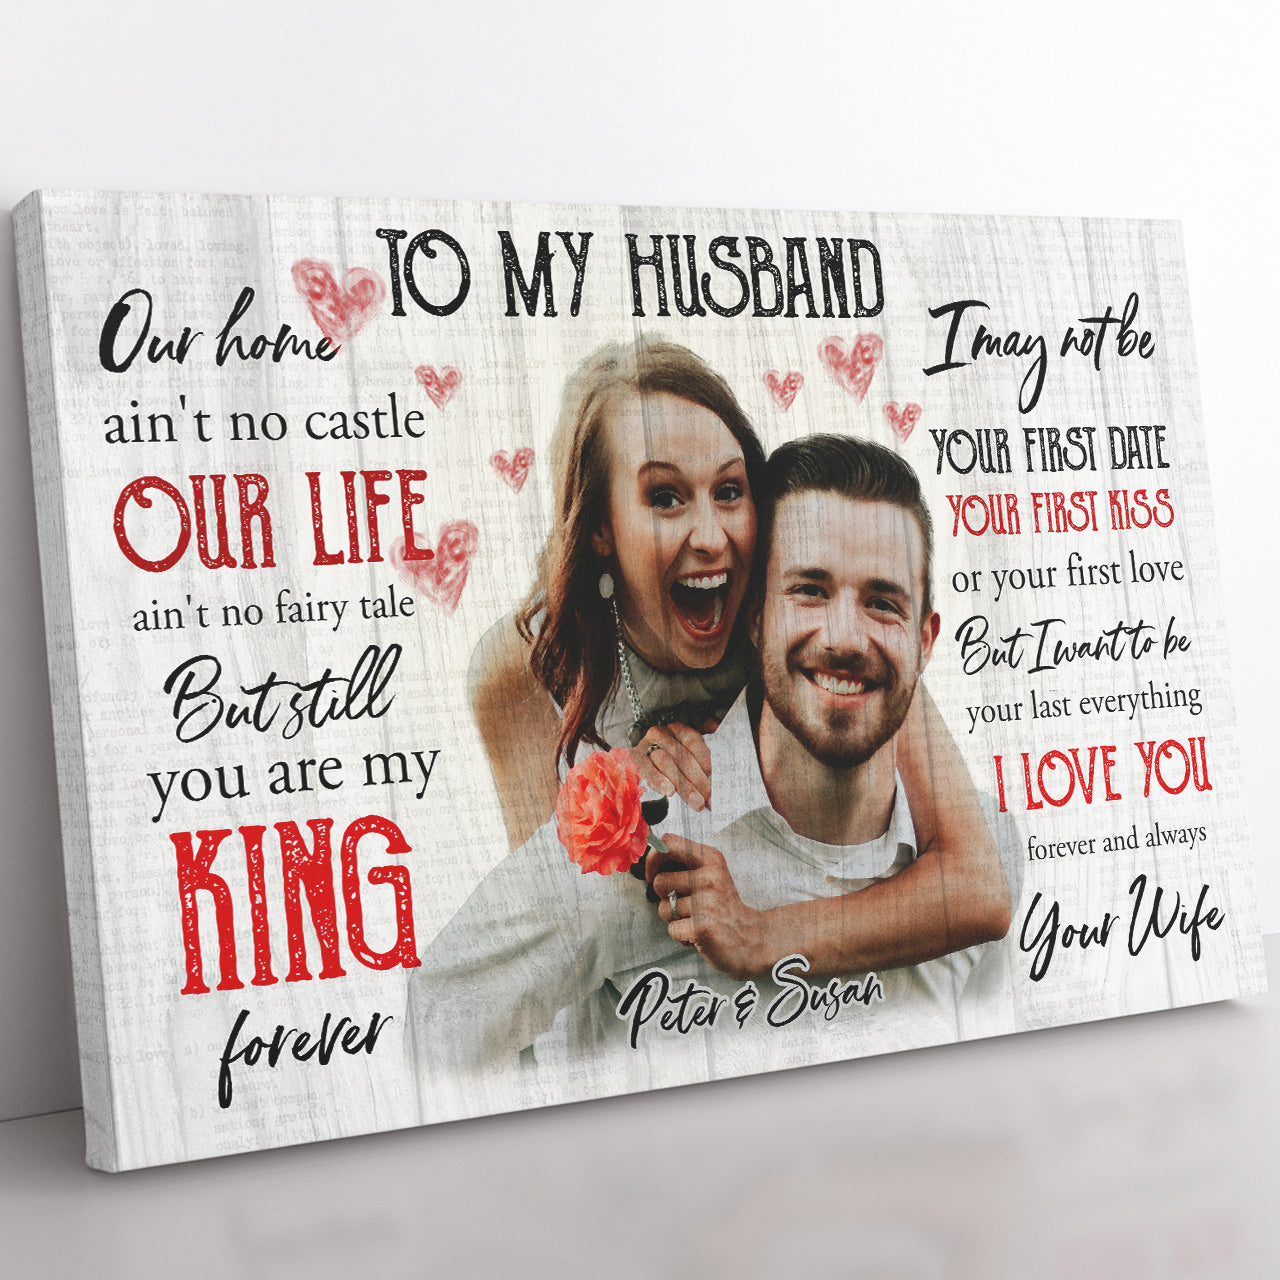 Personalized Canvas Gift Ideas to My Husband, You Are My King 20121807